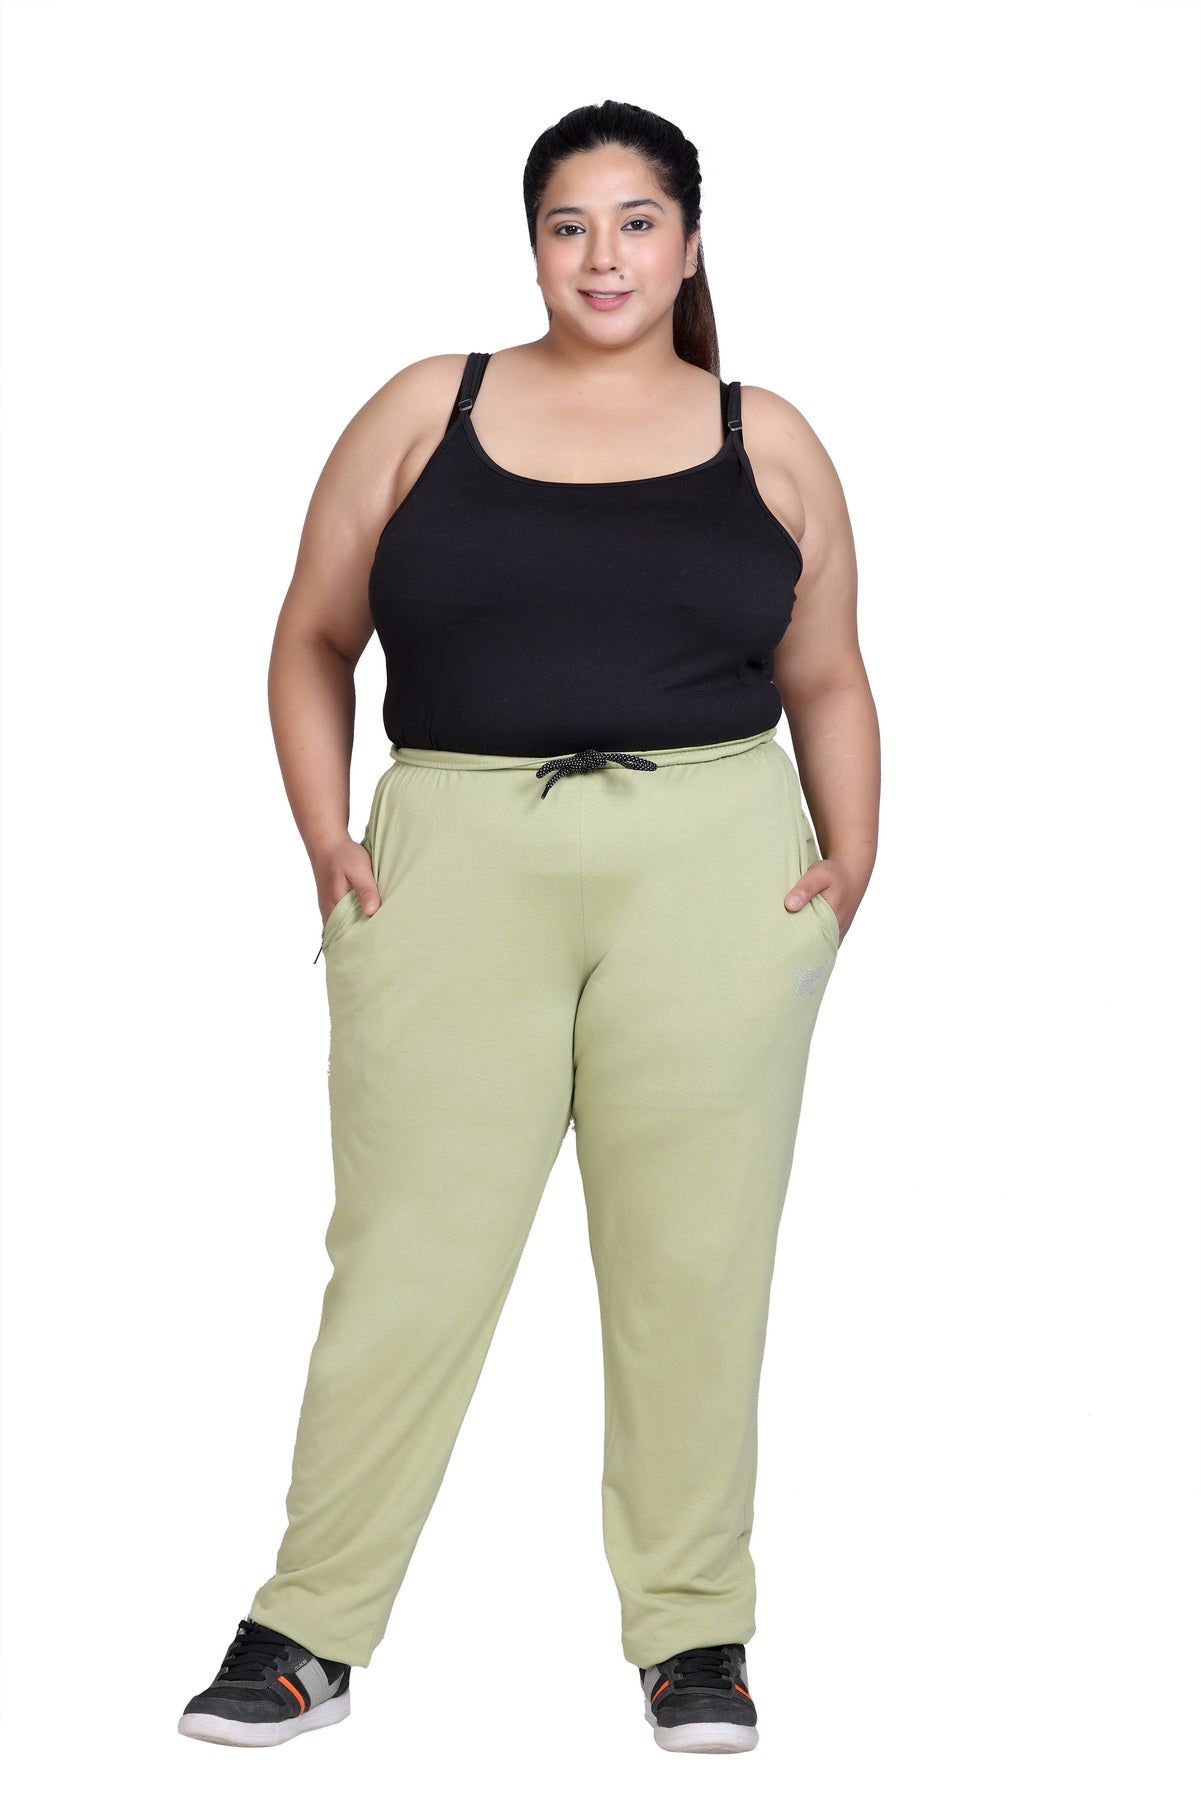 Stylish Green Plain Cotton Track Pants For Women Online In India